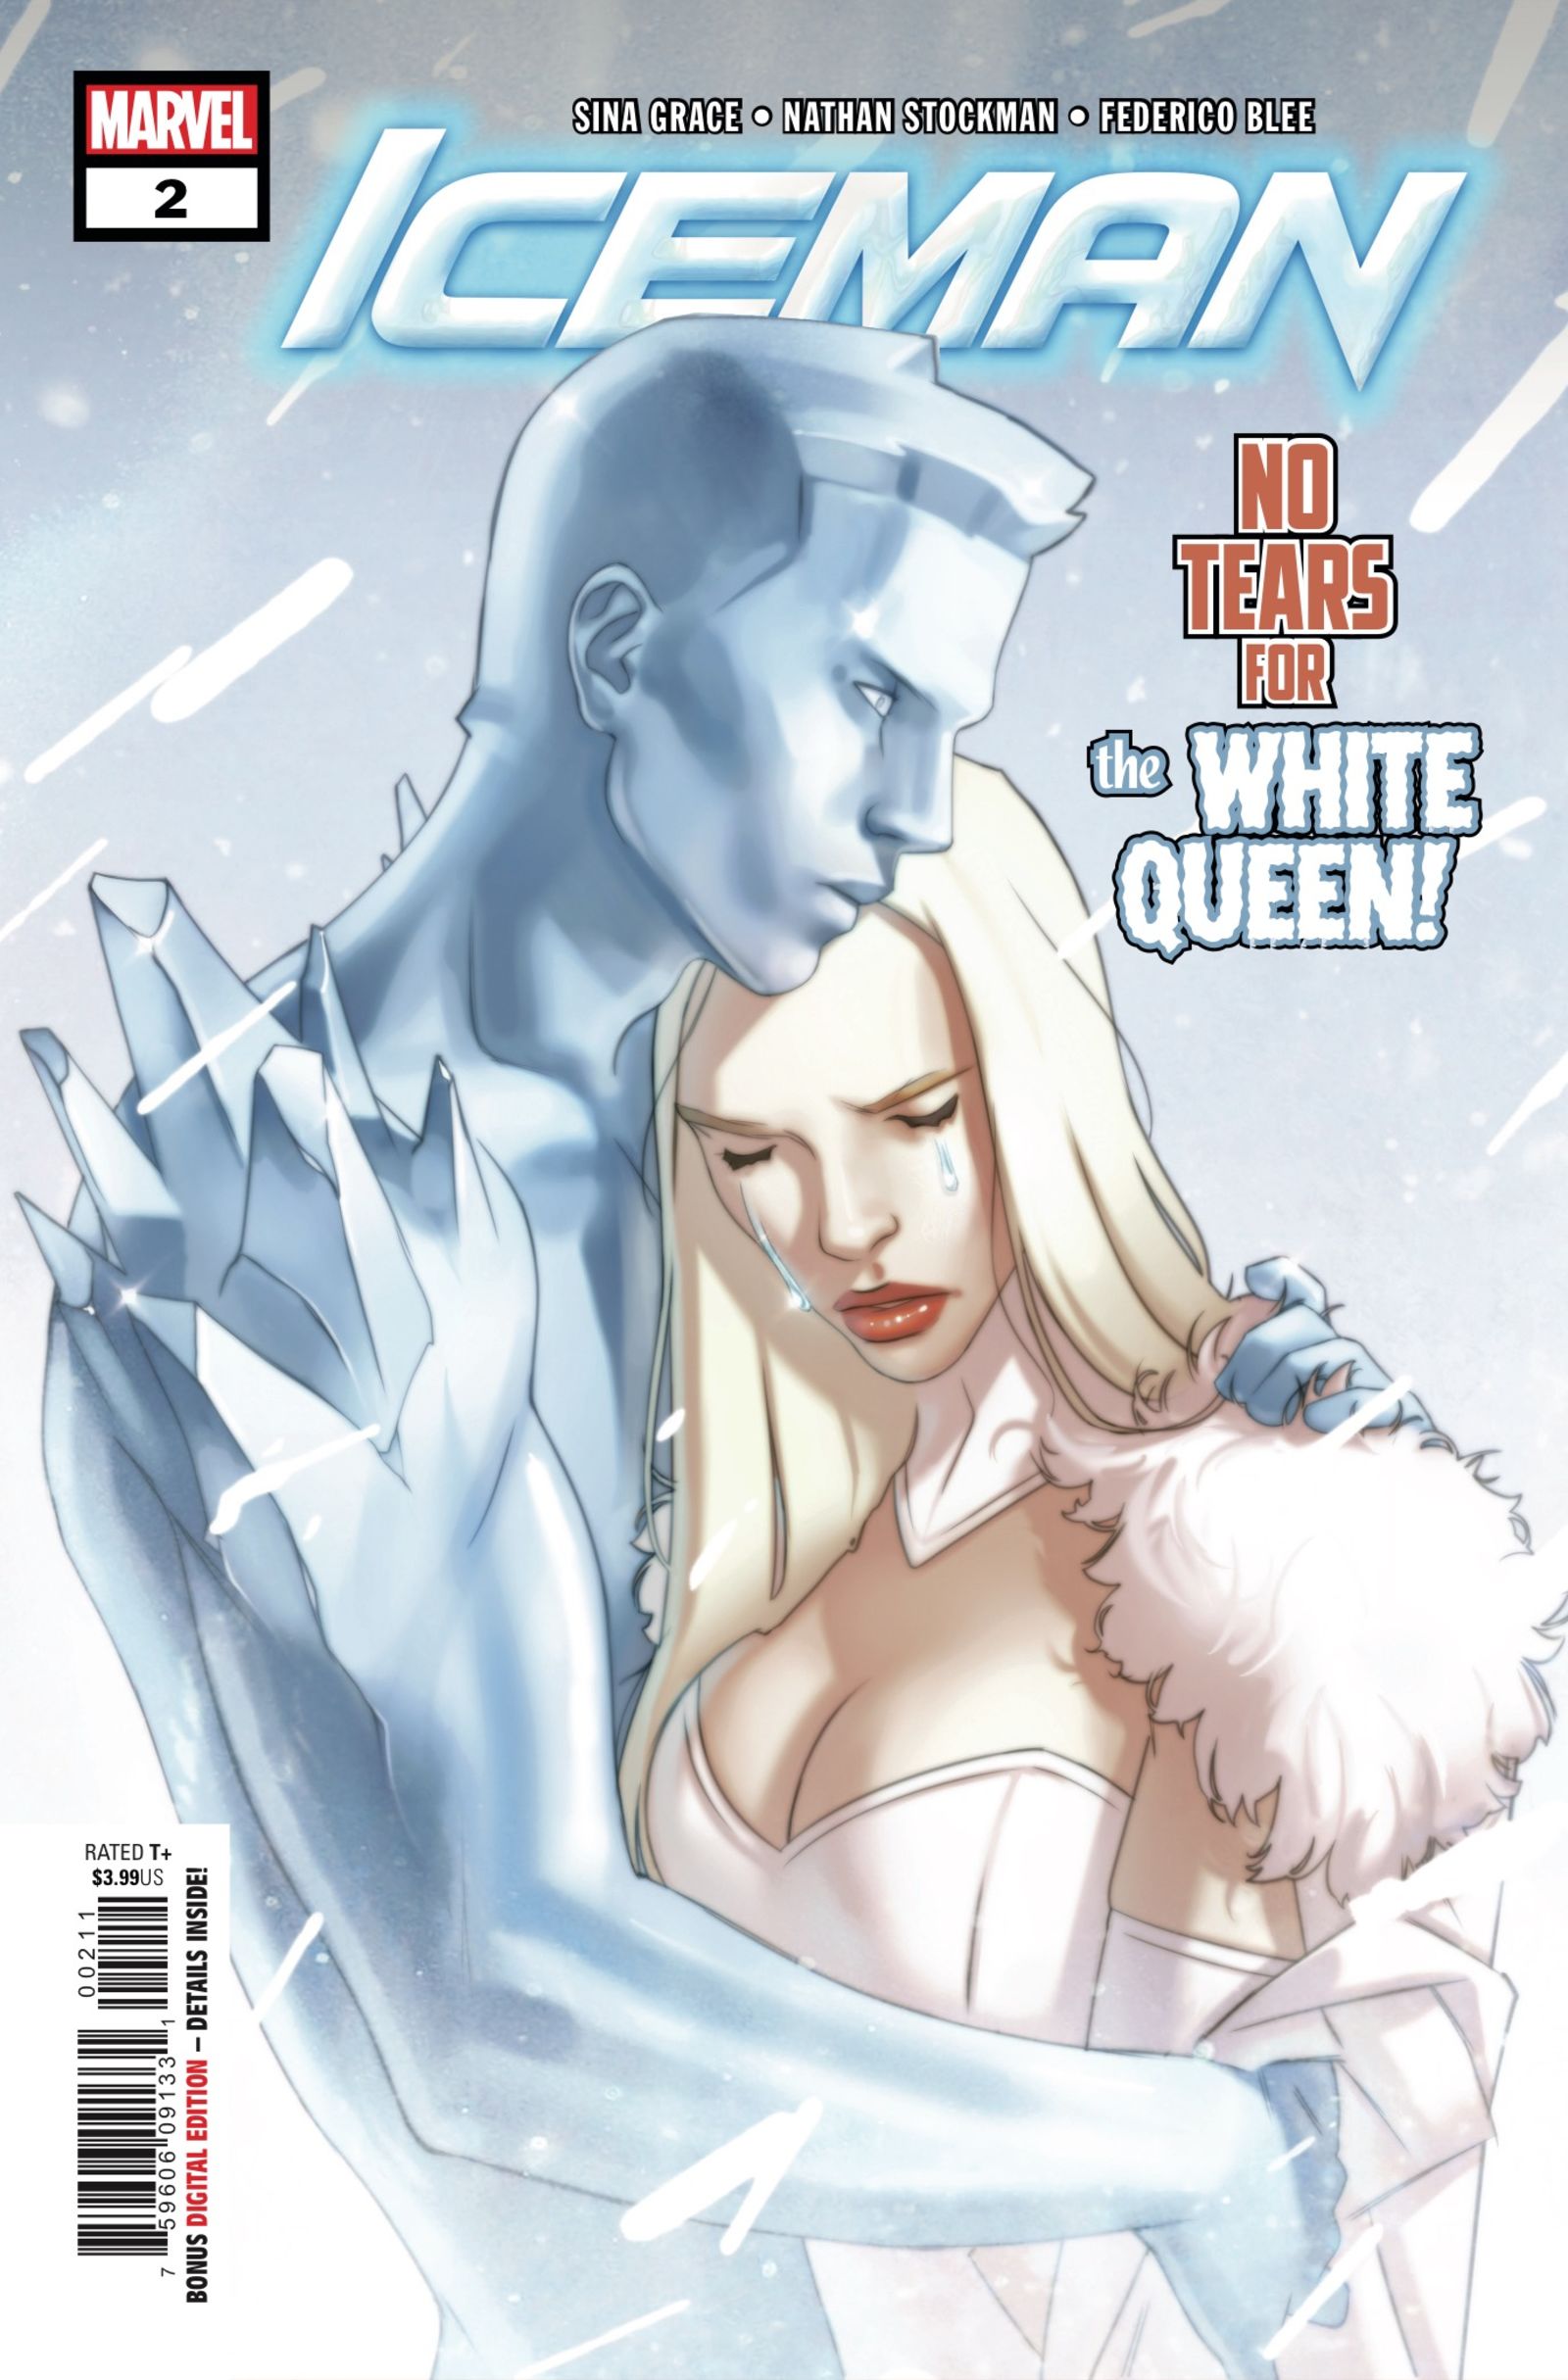 Iceman #2 Review